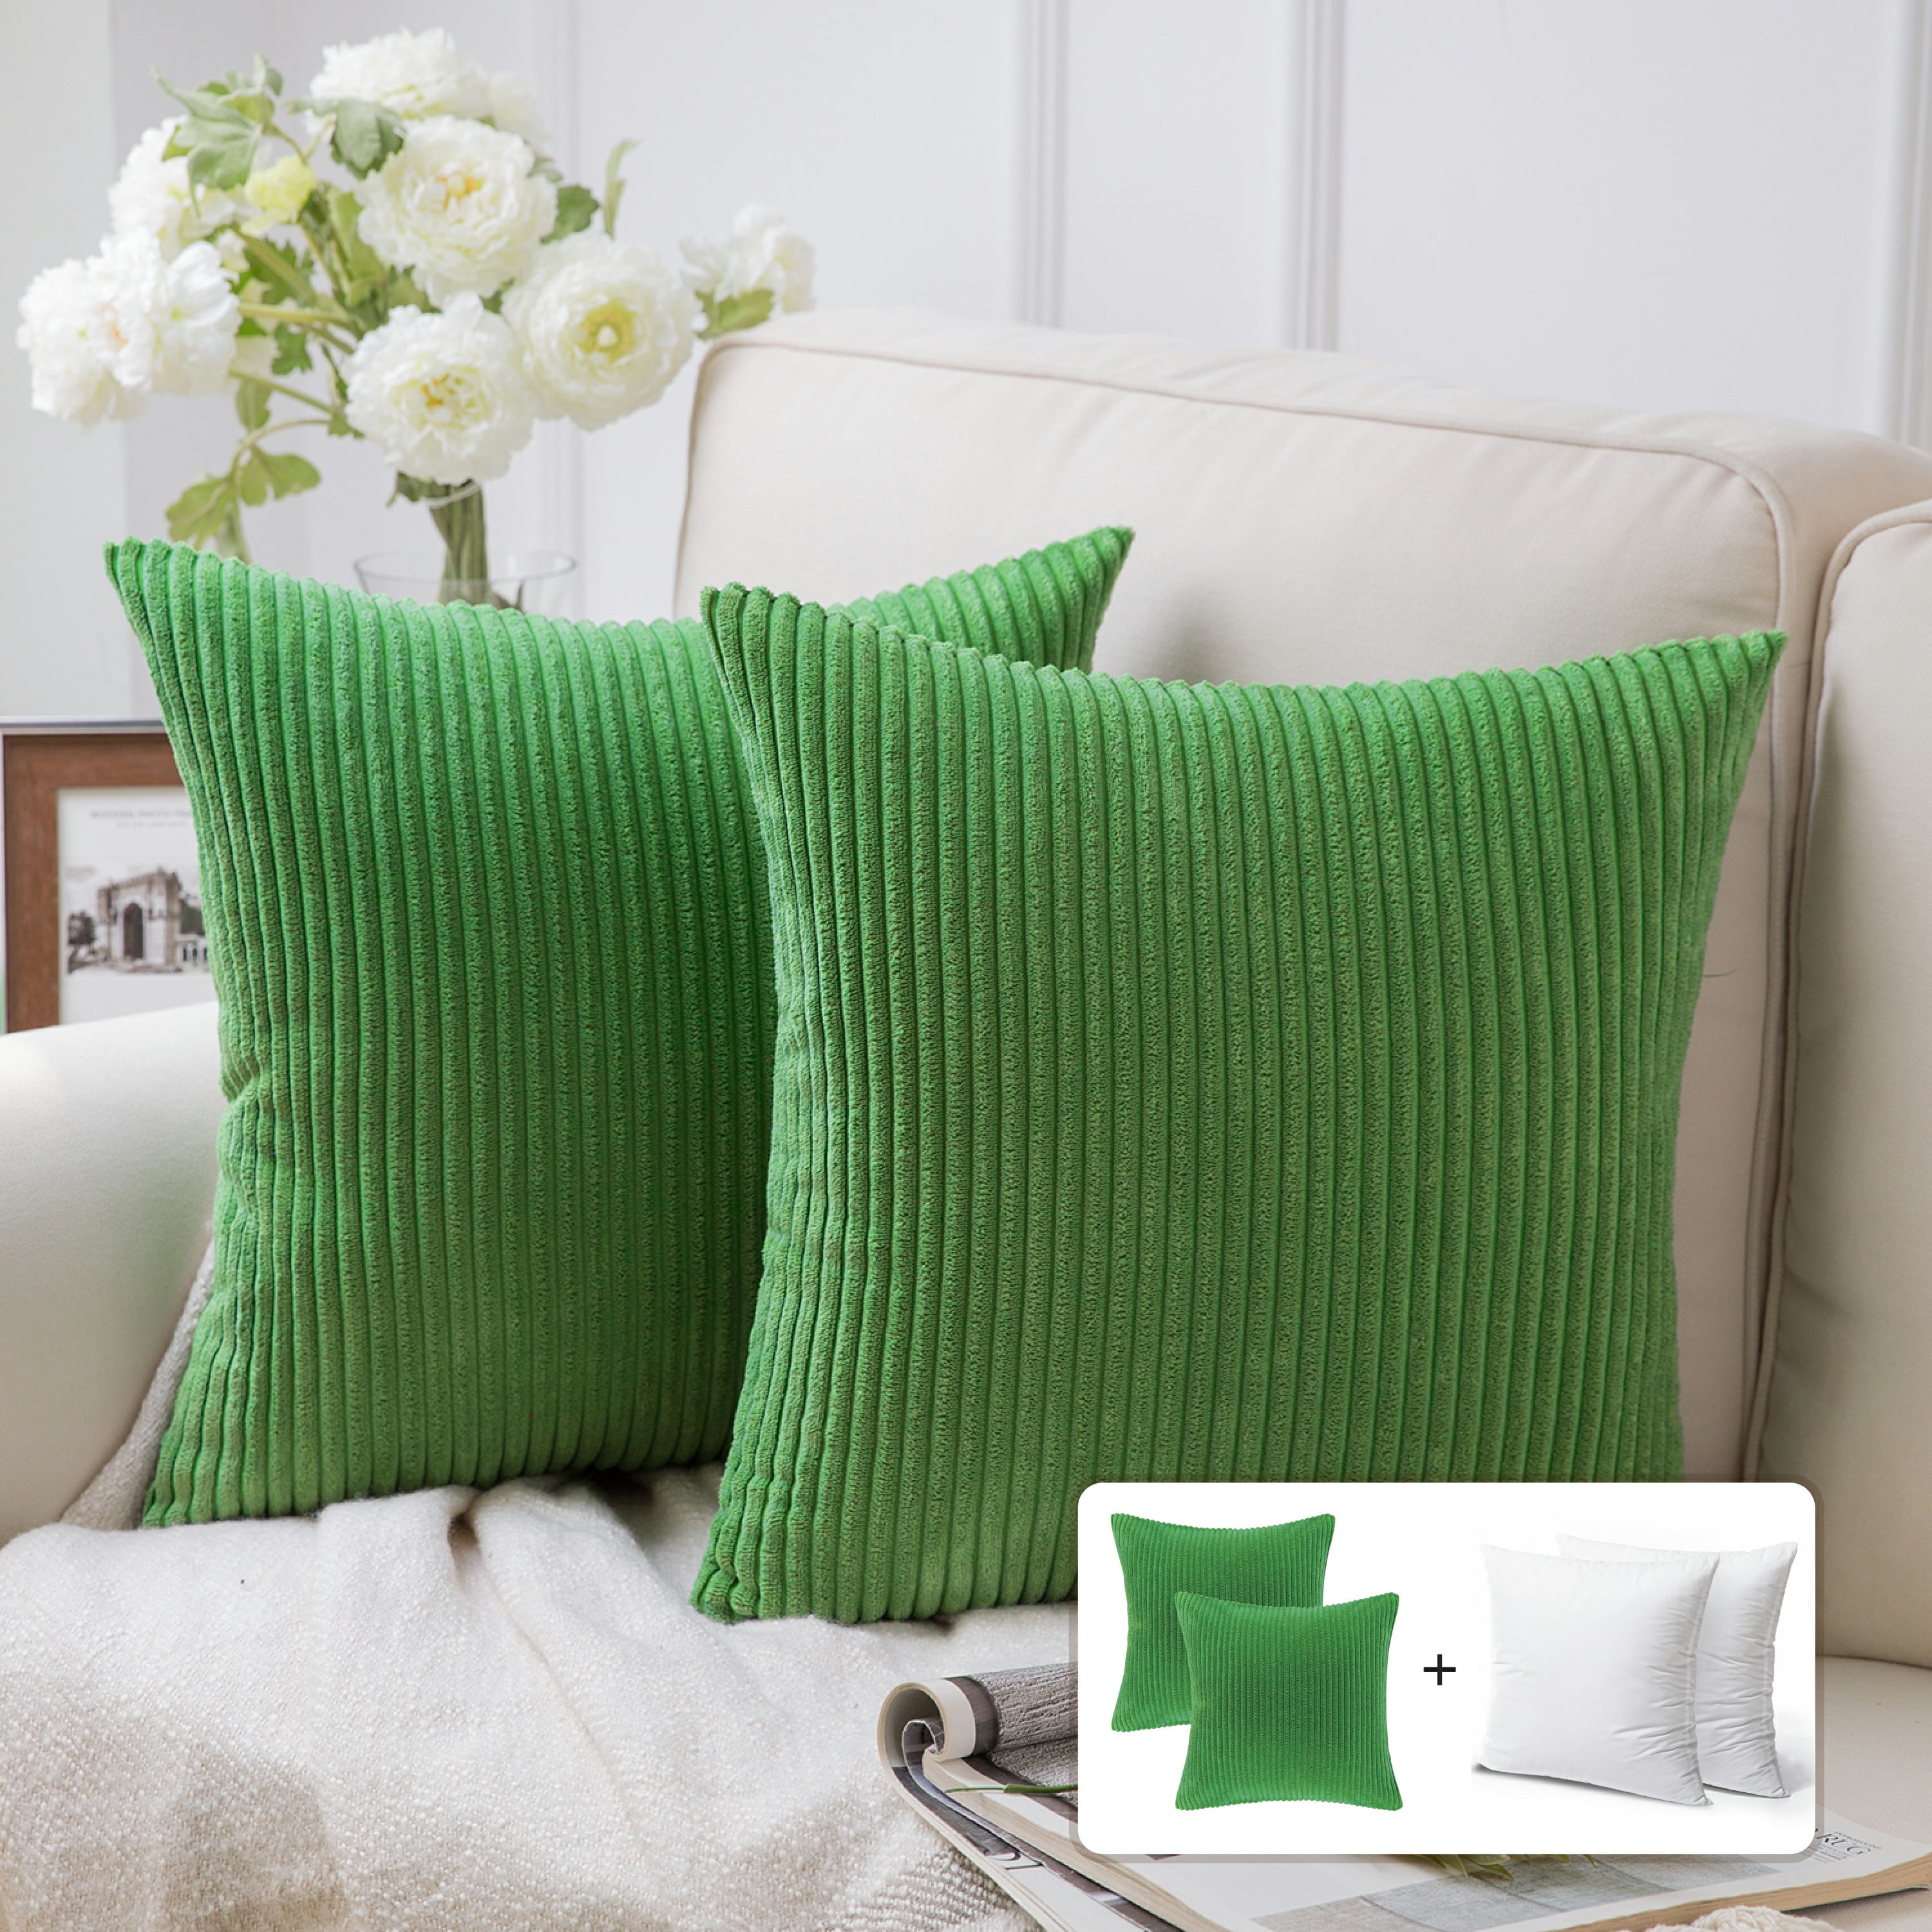 Wide Wale Corduroy 18x18 Oyster Throw Pillow | Pillow Decor